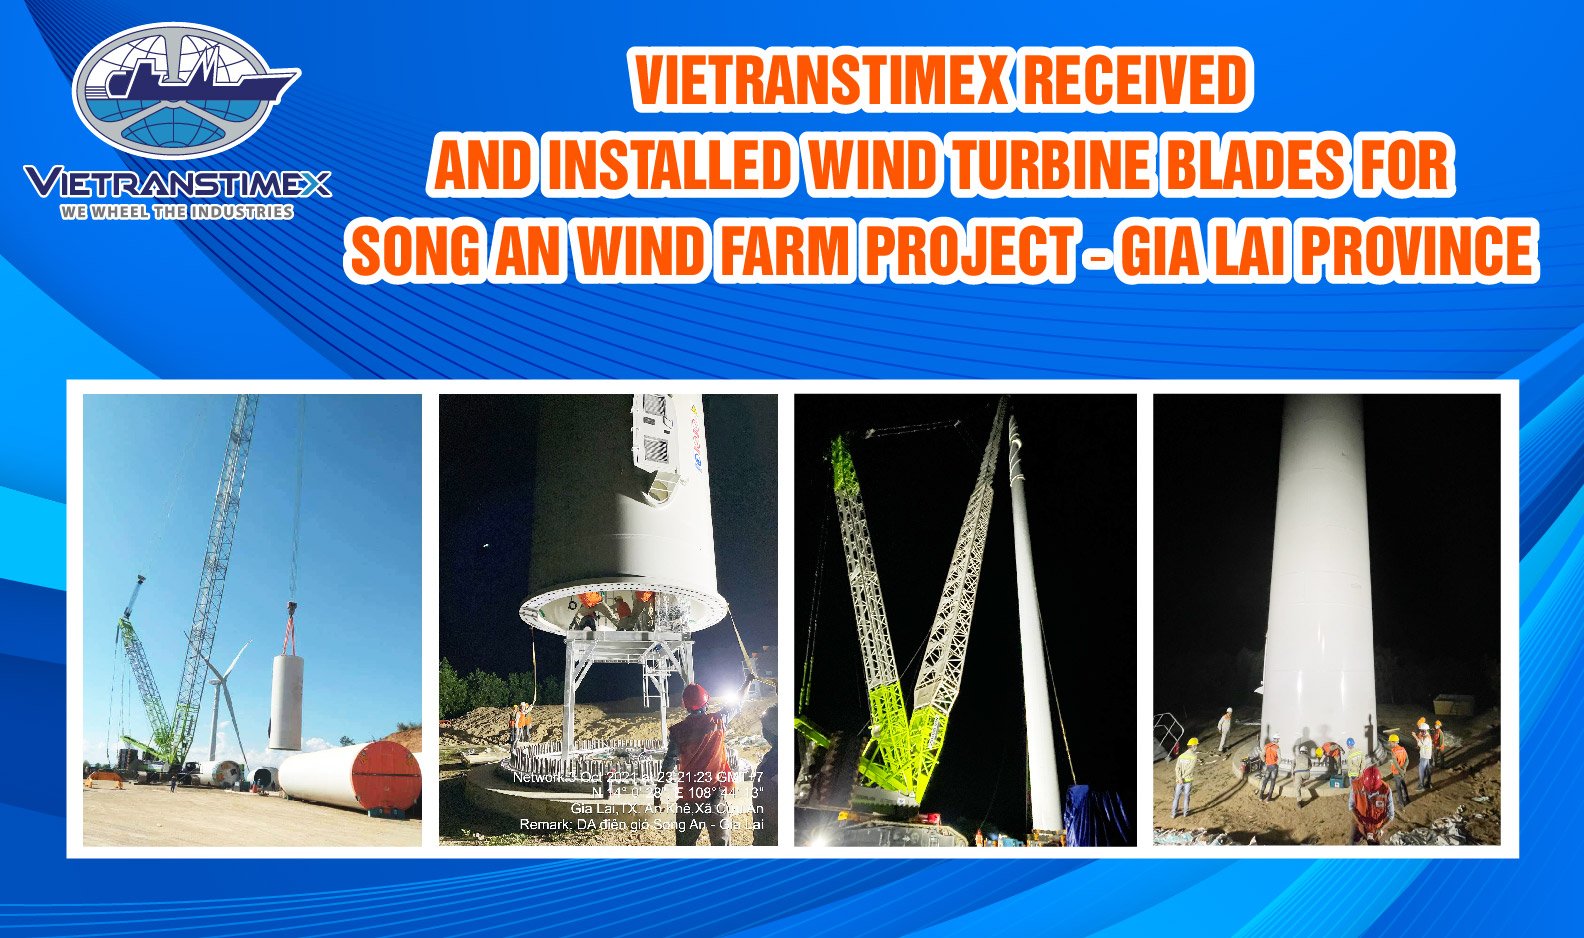 Vietranstimex Received And Installed Wind Turbine Blades For Song An Wind Farm Project – Gia Lai Province